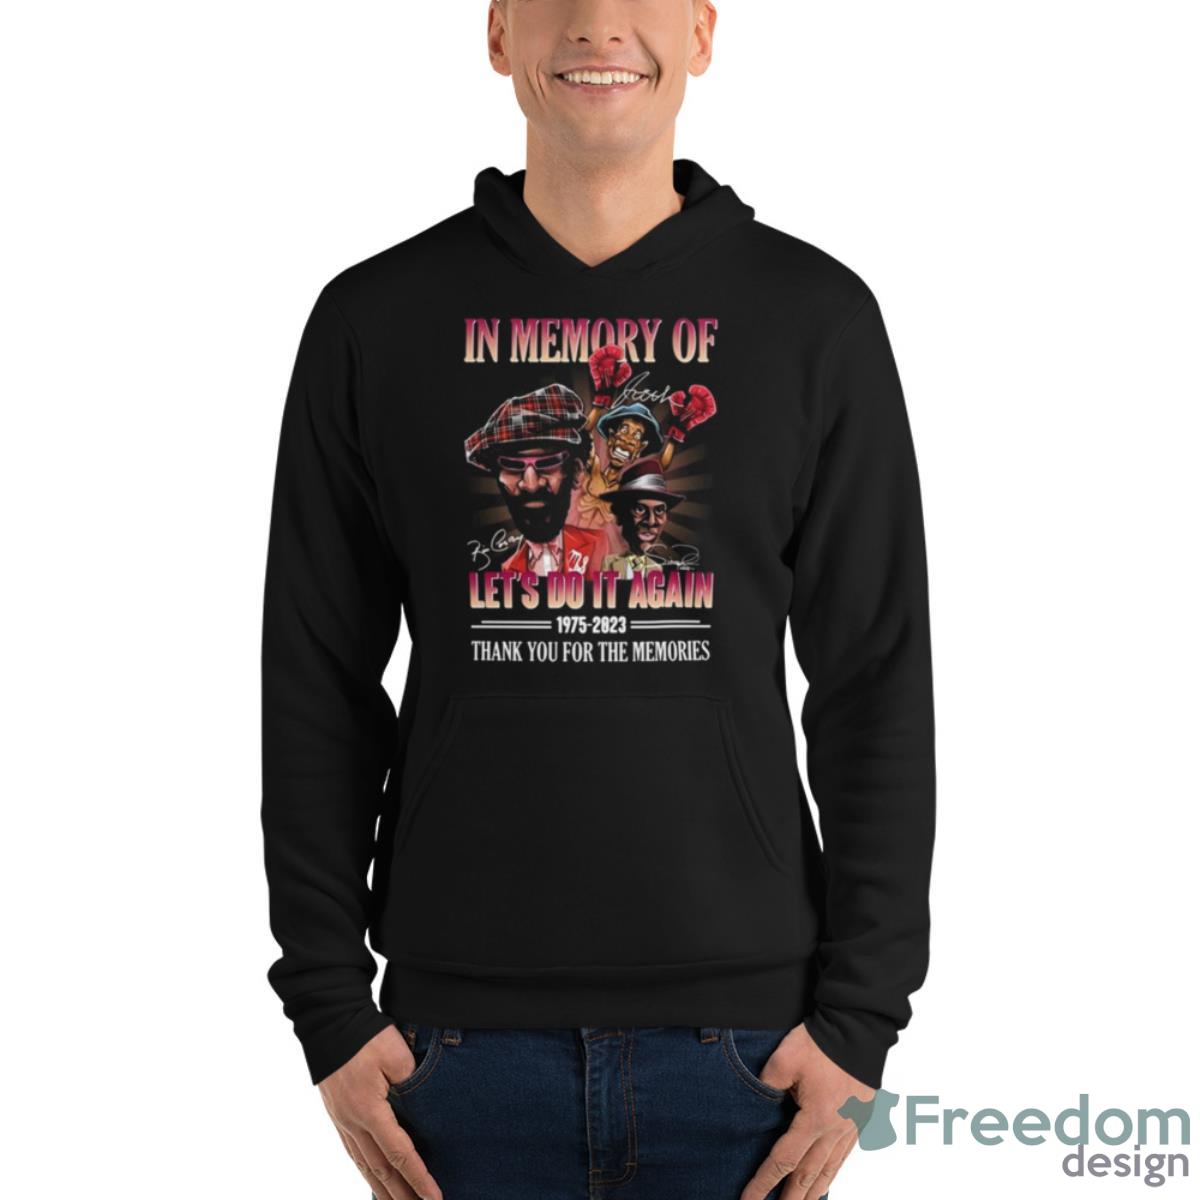 In Memory Of Let’s Do It Again Movies 1975 – 2023 Thank You For The Memories Signatures Shirt